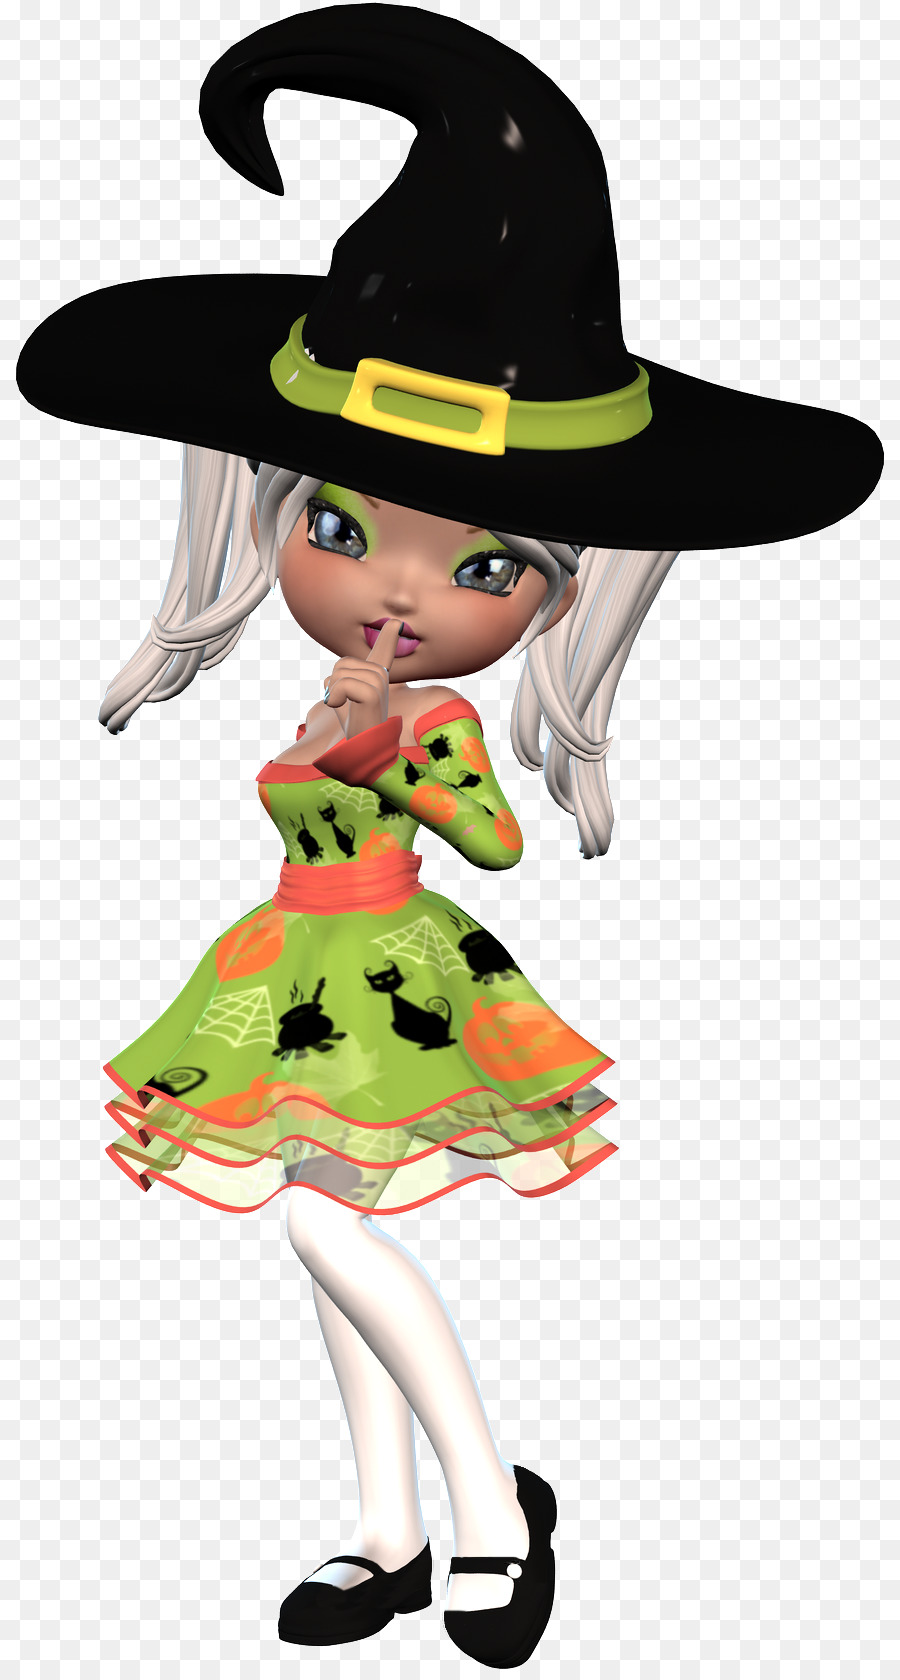 Halloween Witch Hat clipart.